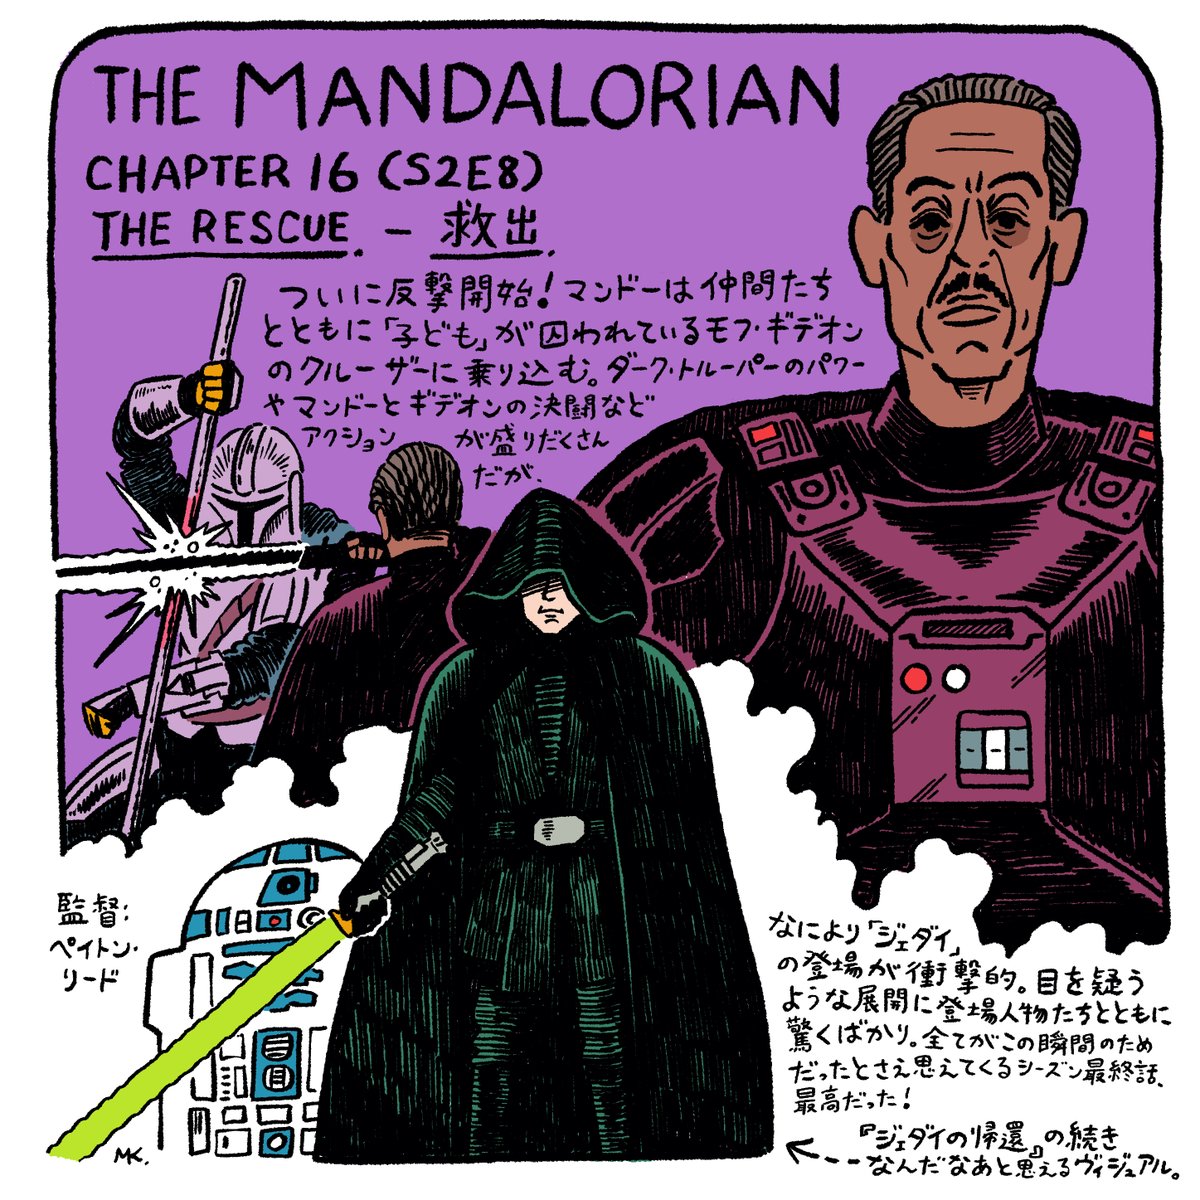 The Mandalorian
Chapter 14: The Tragedy
Chapter 15: The Believer
Chapter 16: The Rescue
#TheMandalorian 